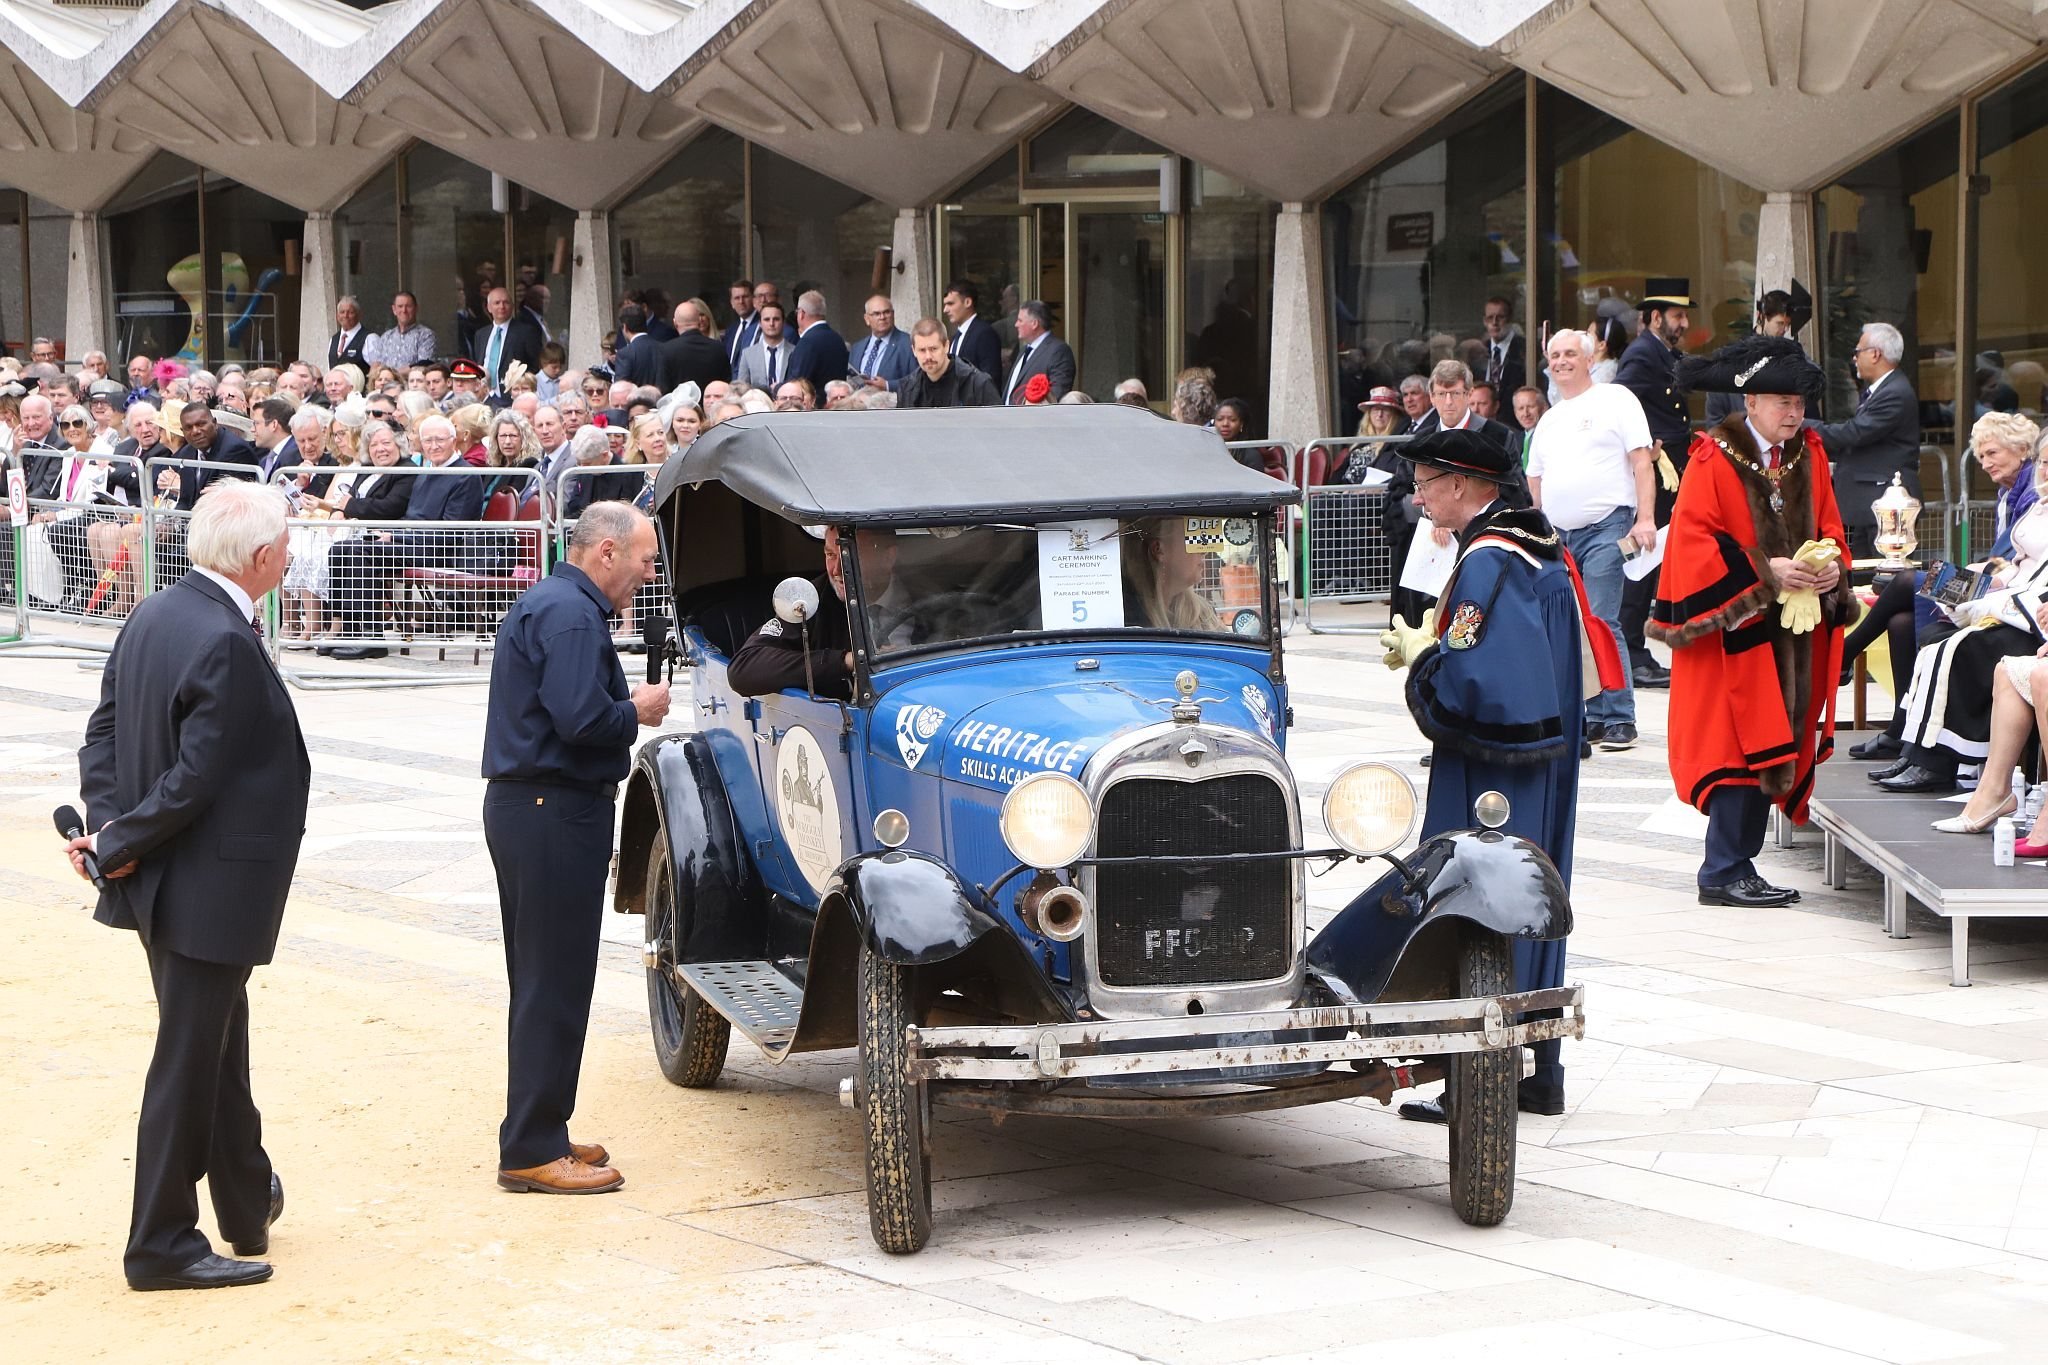 Ford Model A FF549P. City of London 2023 Cart Marking in Guildhall Yard on 22-Jul-2023. Hosted by the Worshipful Company of Carmen with the Lord Mayor of the City of London in attendance. Wooden plates on the vehicles are branded with hot irons to allow them to ply for trade in the Square Mile. Another of the City Livery Company's annual ceremonies.